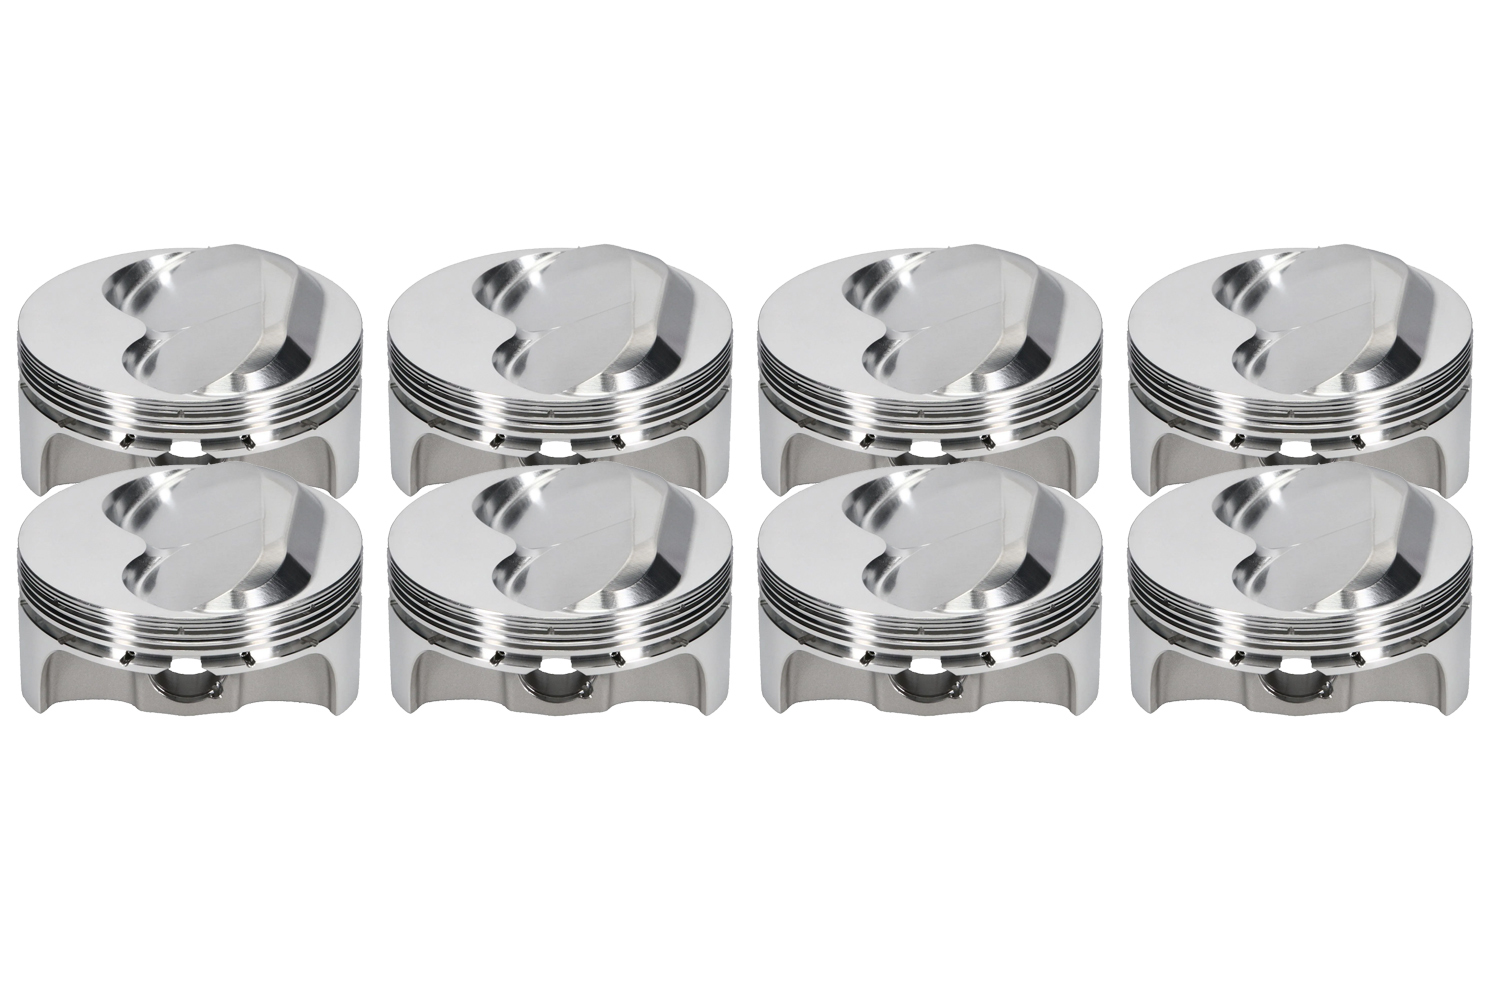 JE Pistons 301475 Piston, 23 Degree FSR Hollow Dome, Forged, 4.125 in Bore, 0.043 x 0.043 x 3 mm Ring Grooves, Plus 10.80 cc, Small Block Chevy, Set of 8